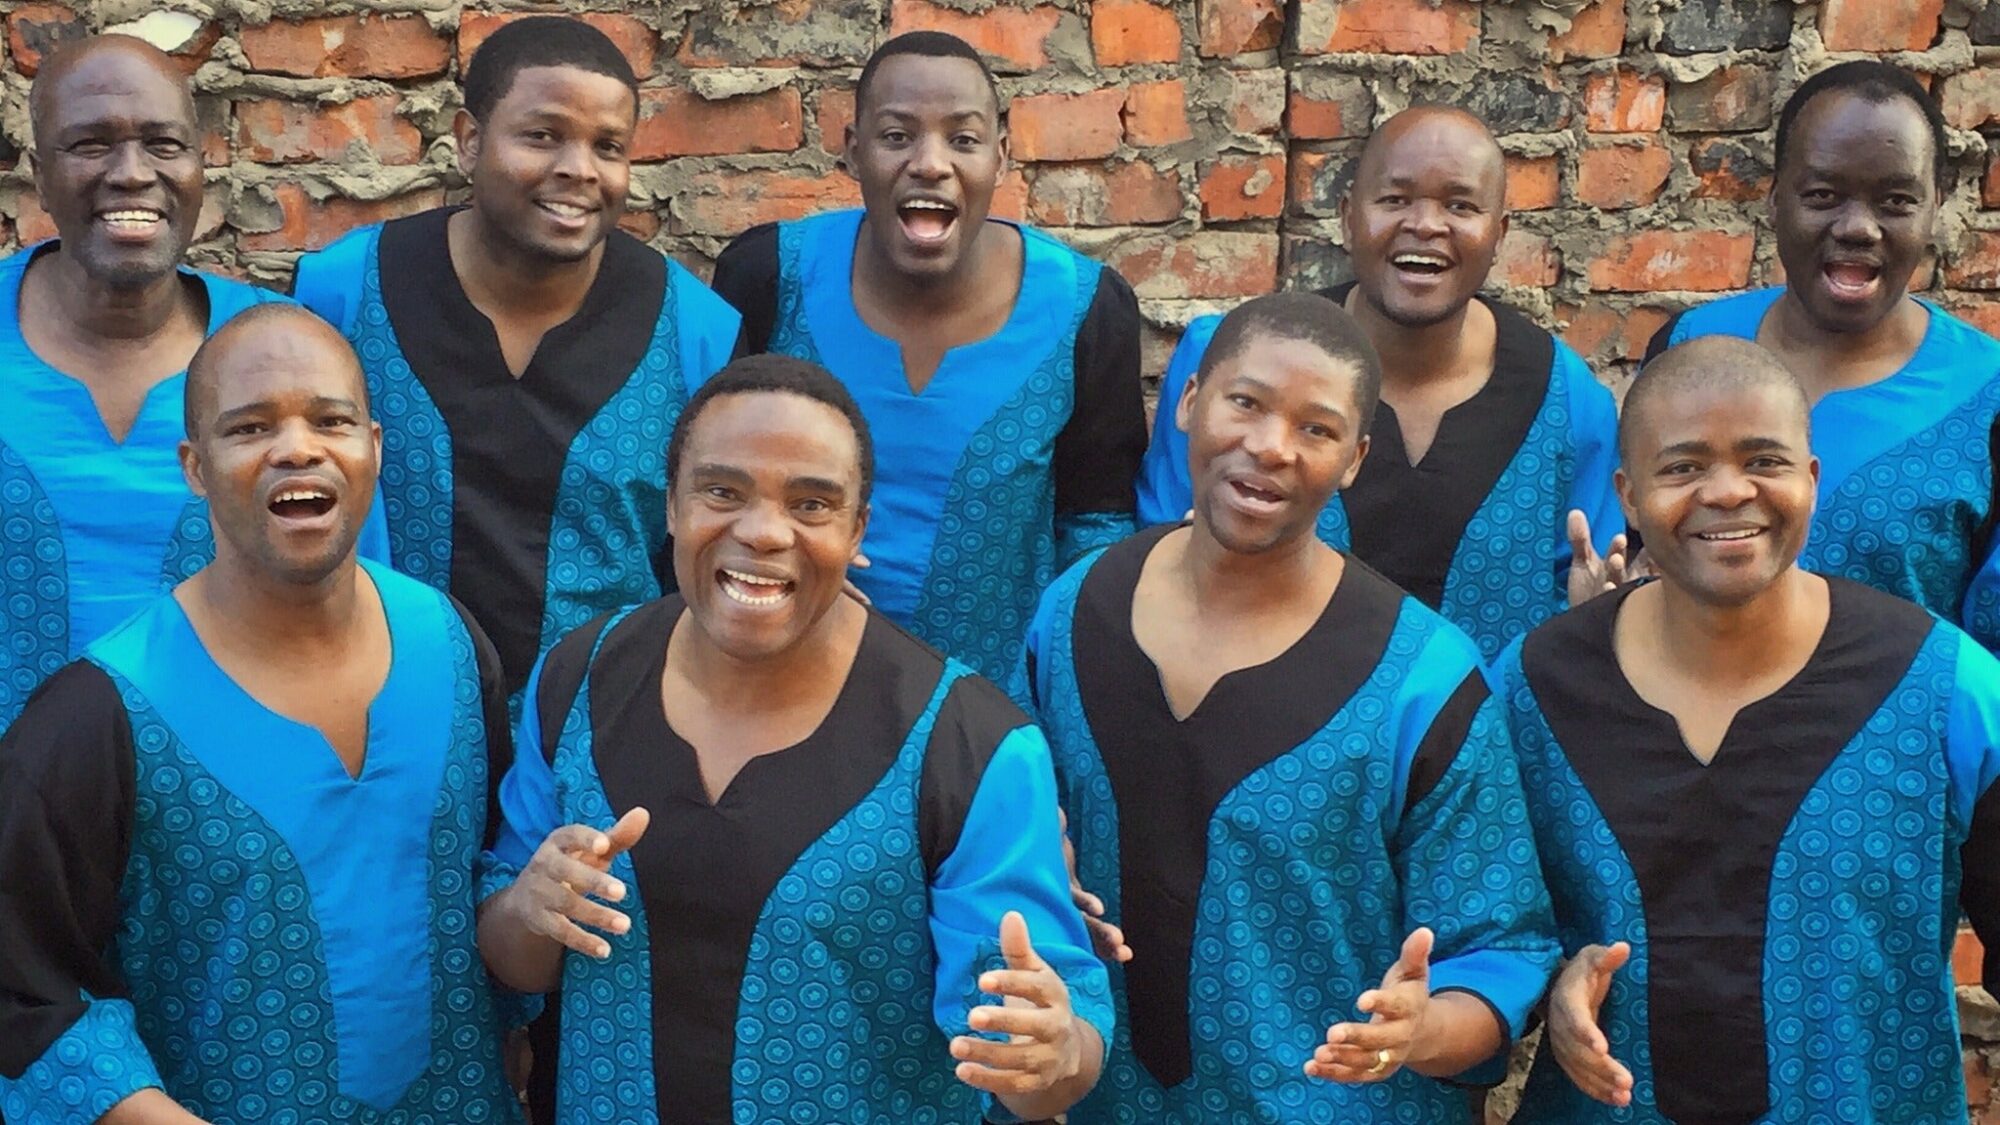 Image name Ladysmith Black Mambazo at Grand Opera House York York the 28 image from the post Ladysmith Black Mambazo at Grand Opera House, York, York in Yorkshire.com.